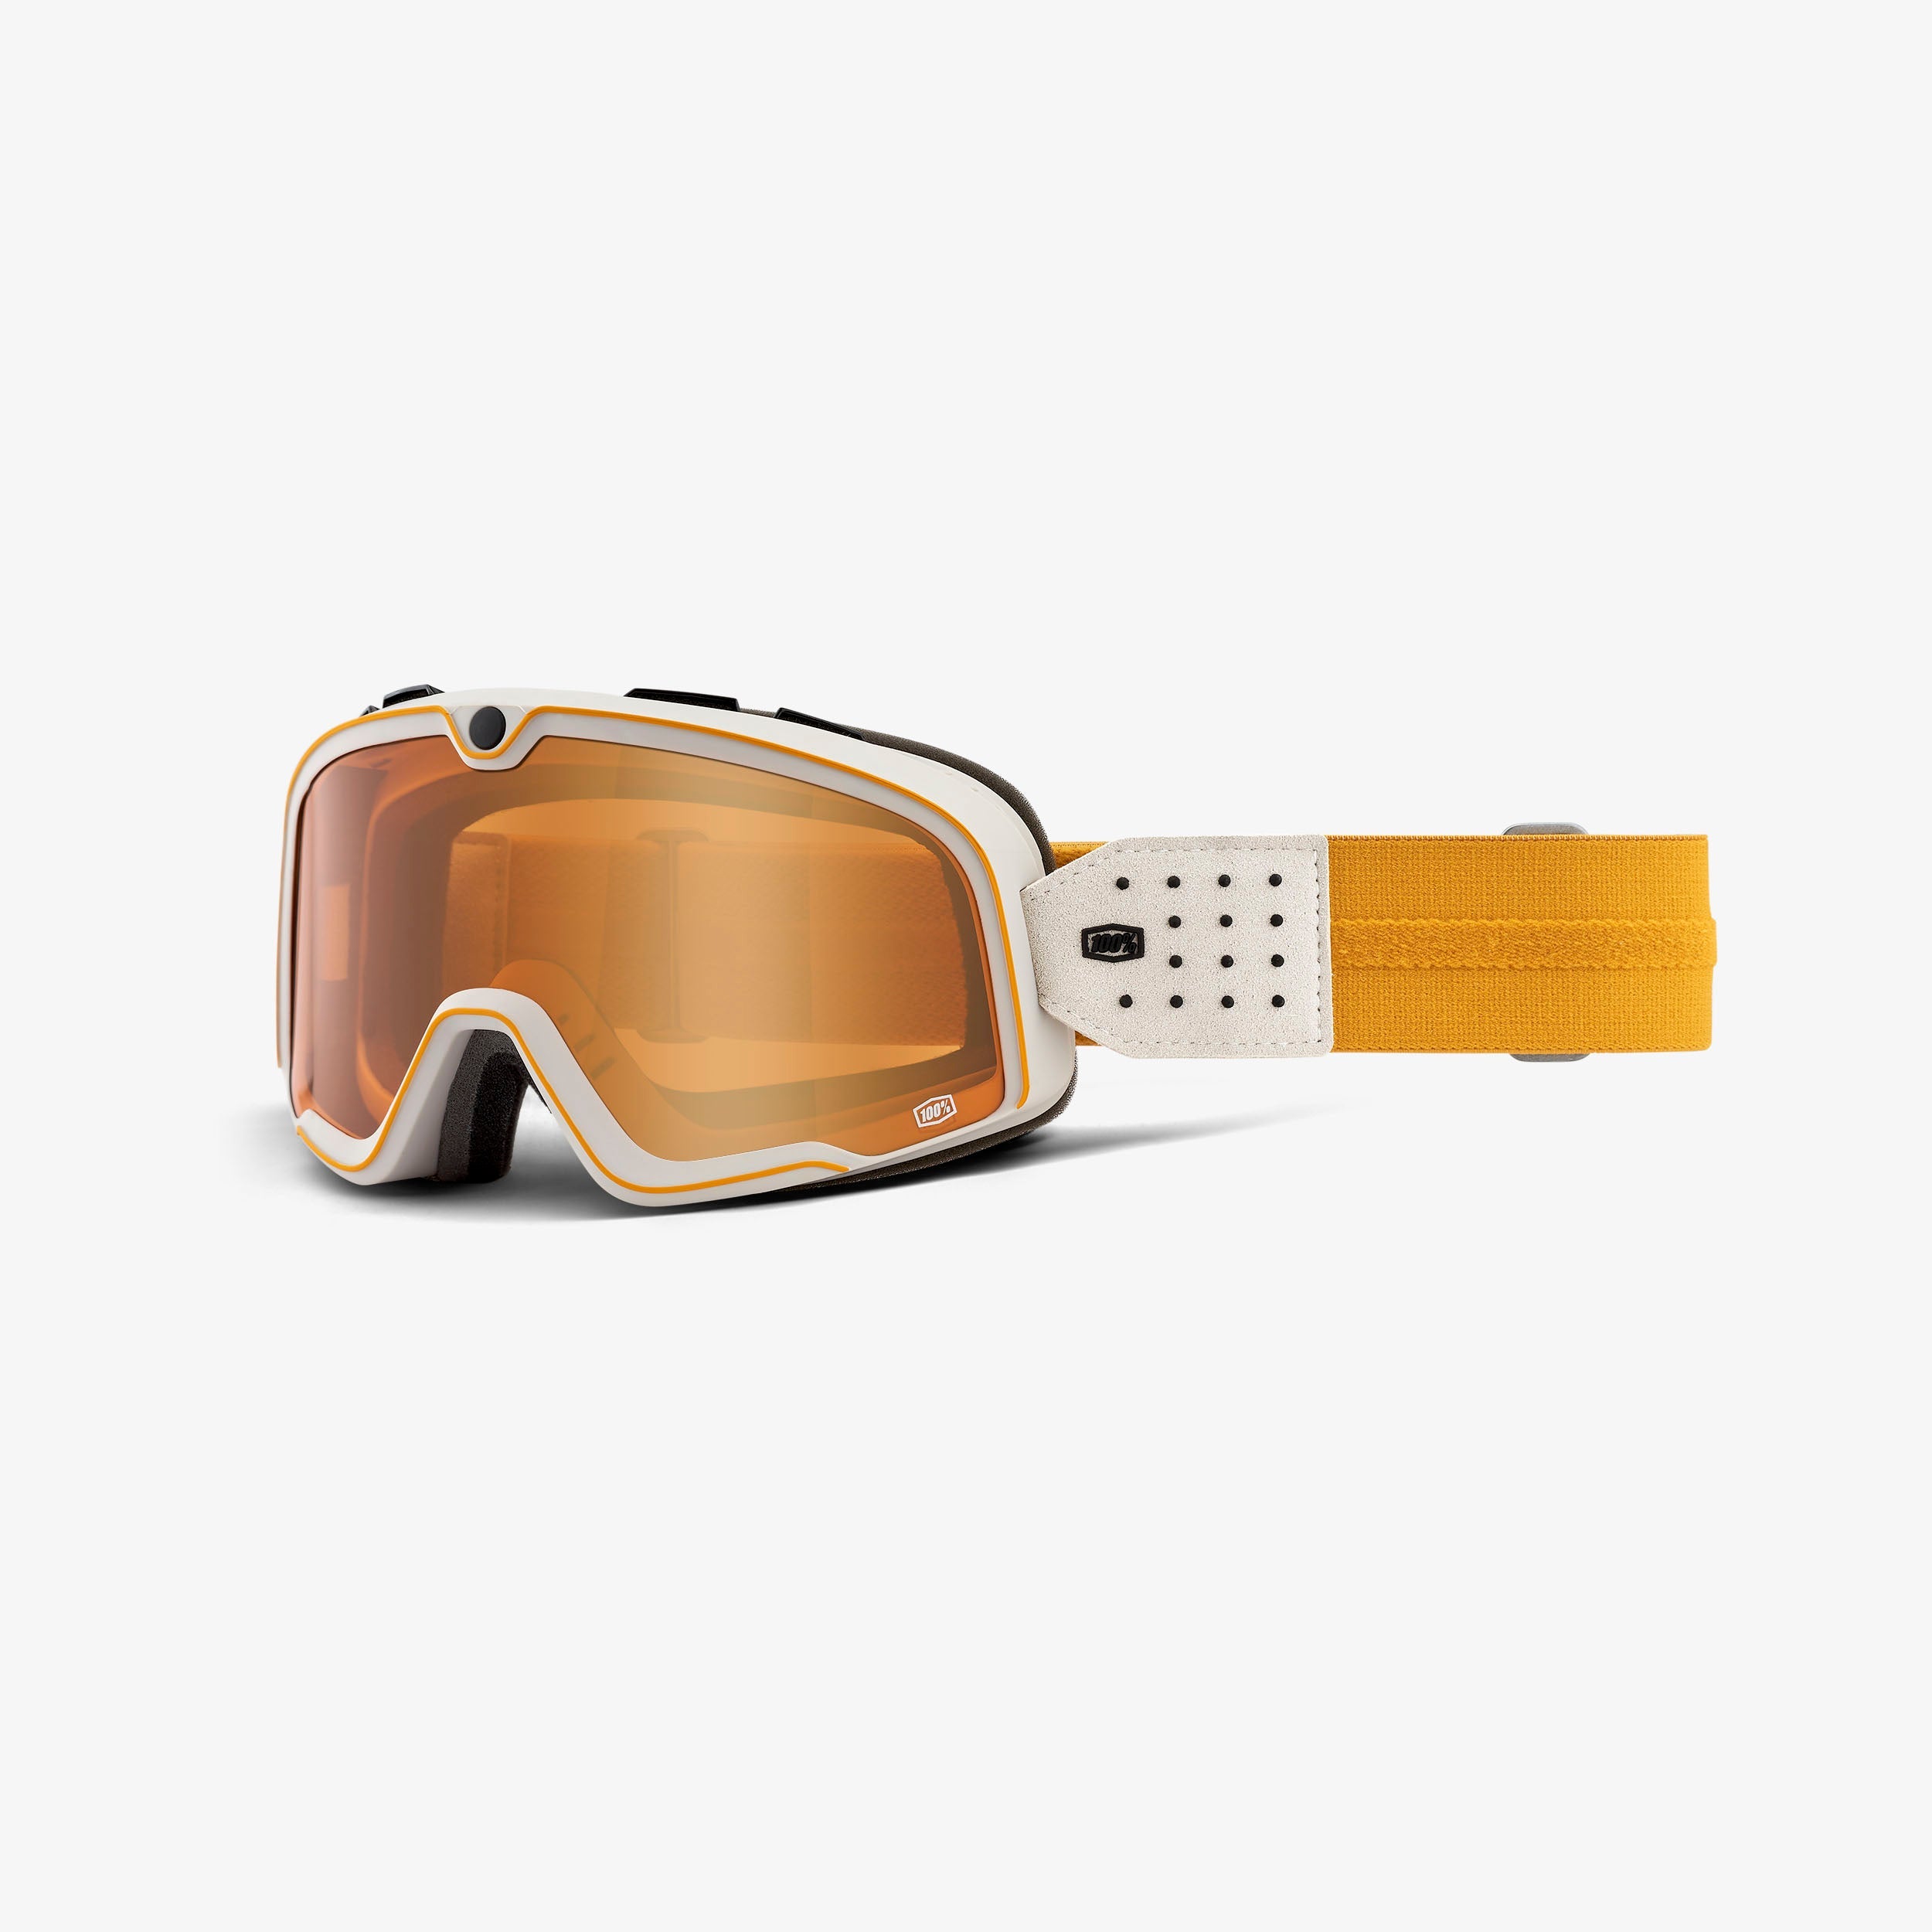 BARSTOW Goggle Oceanside Persimmon Lens